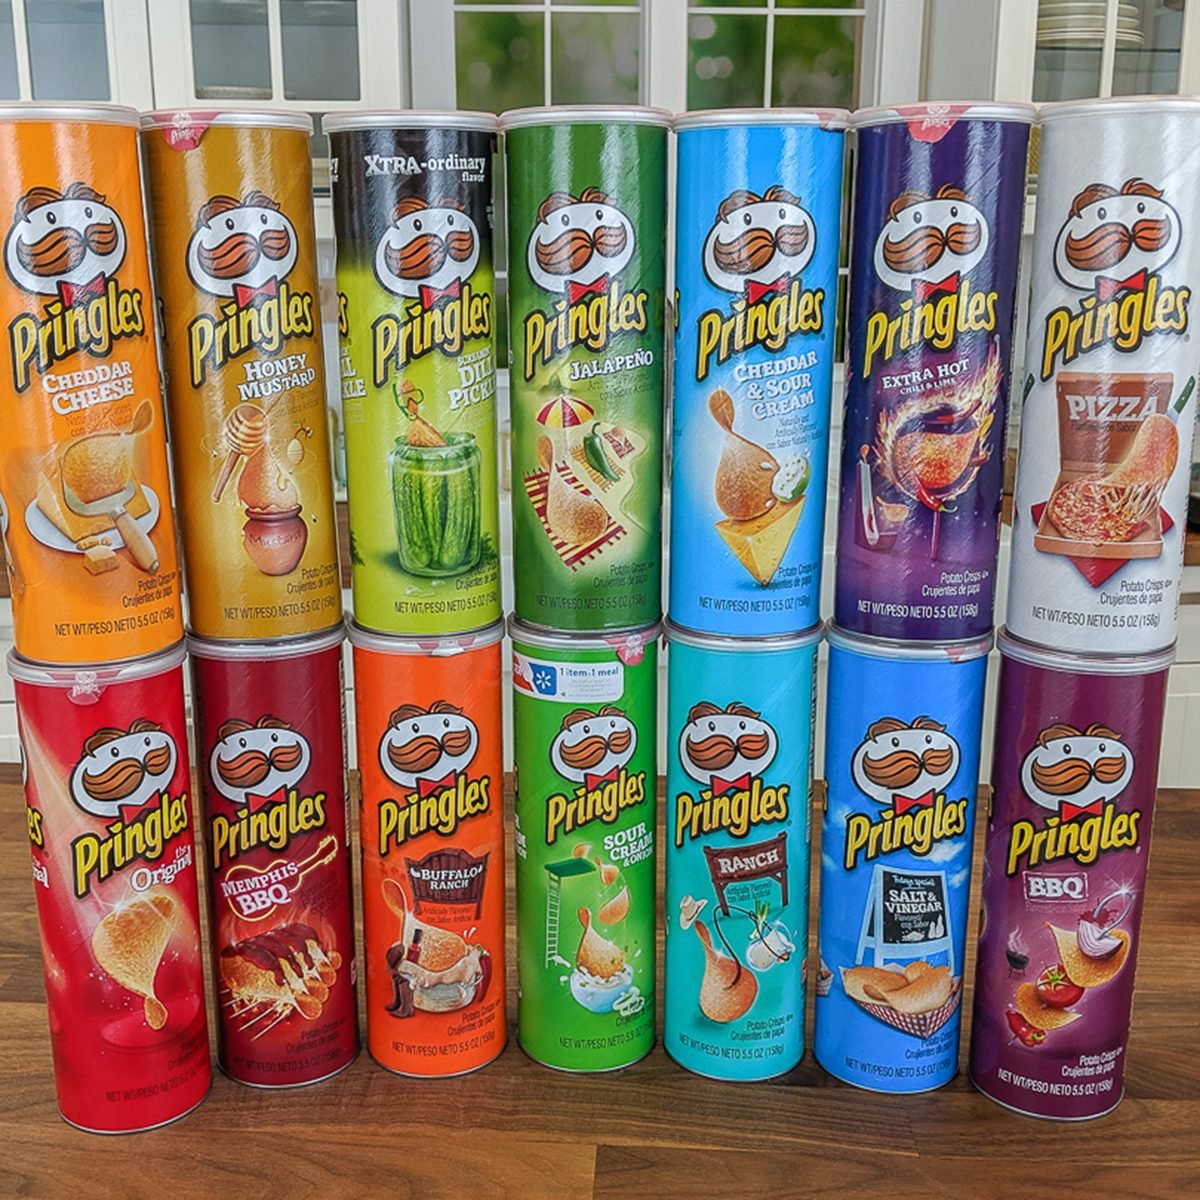 We Tried Every Single Pringles Flavor, Here's How They Ranked